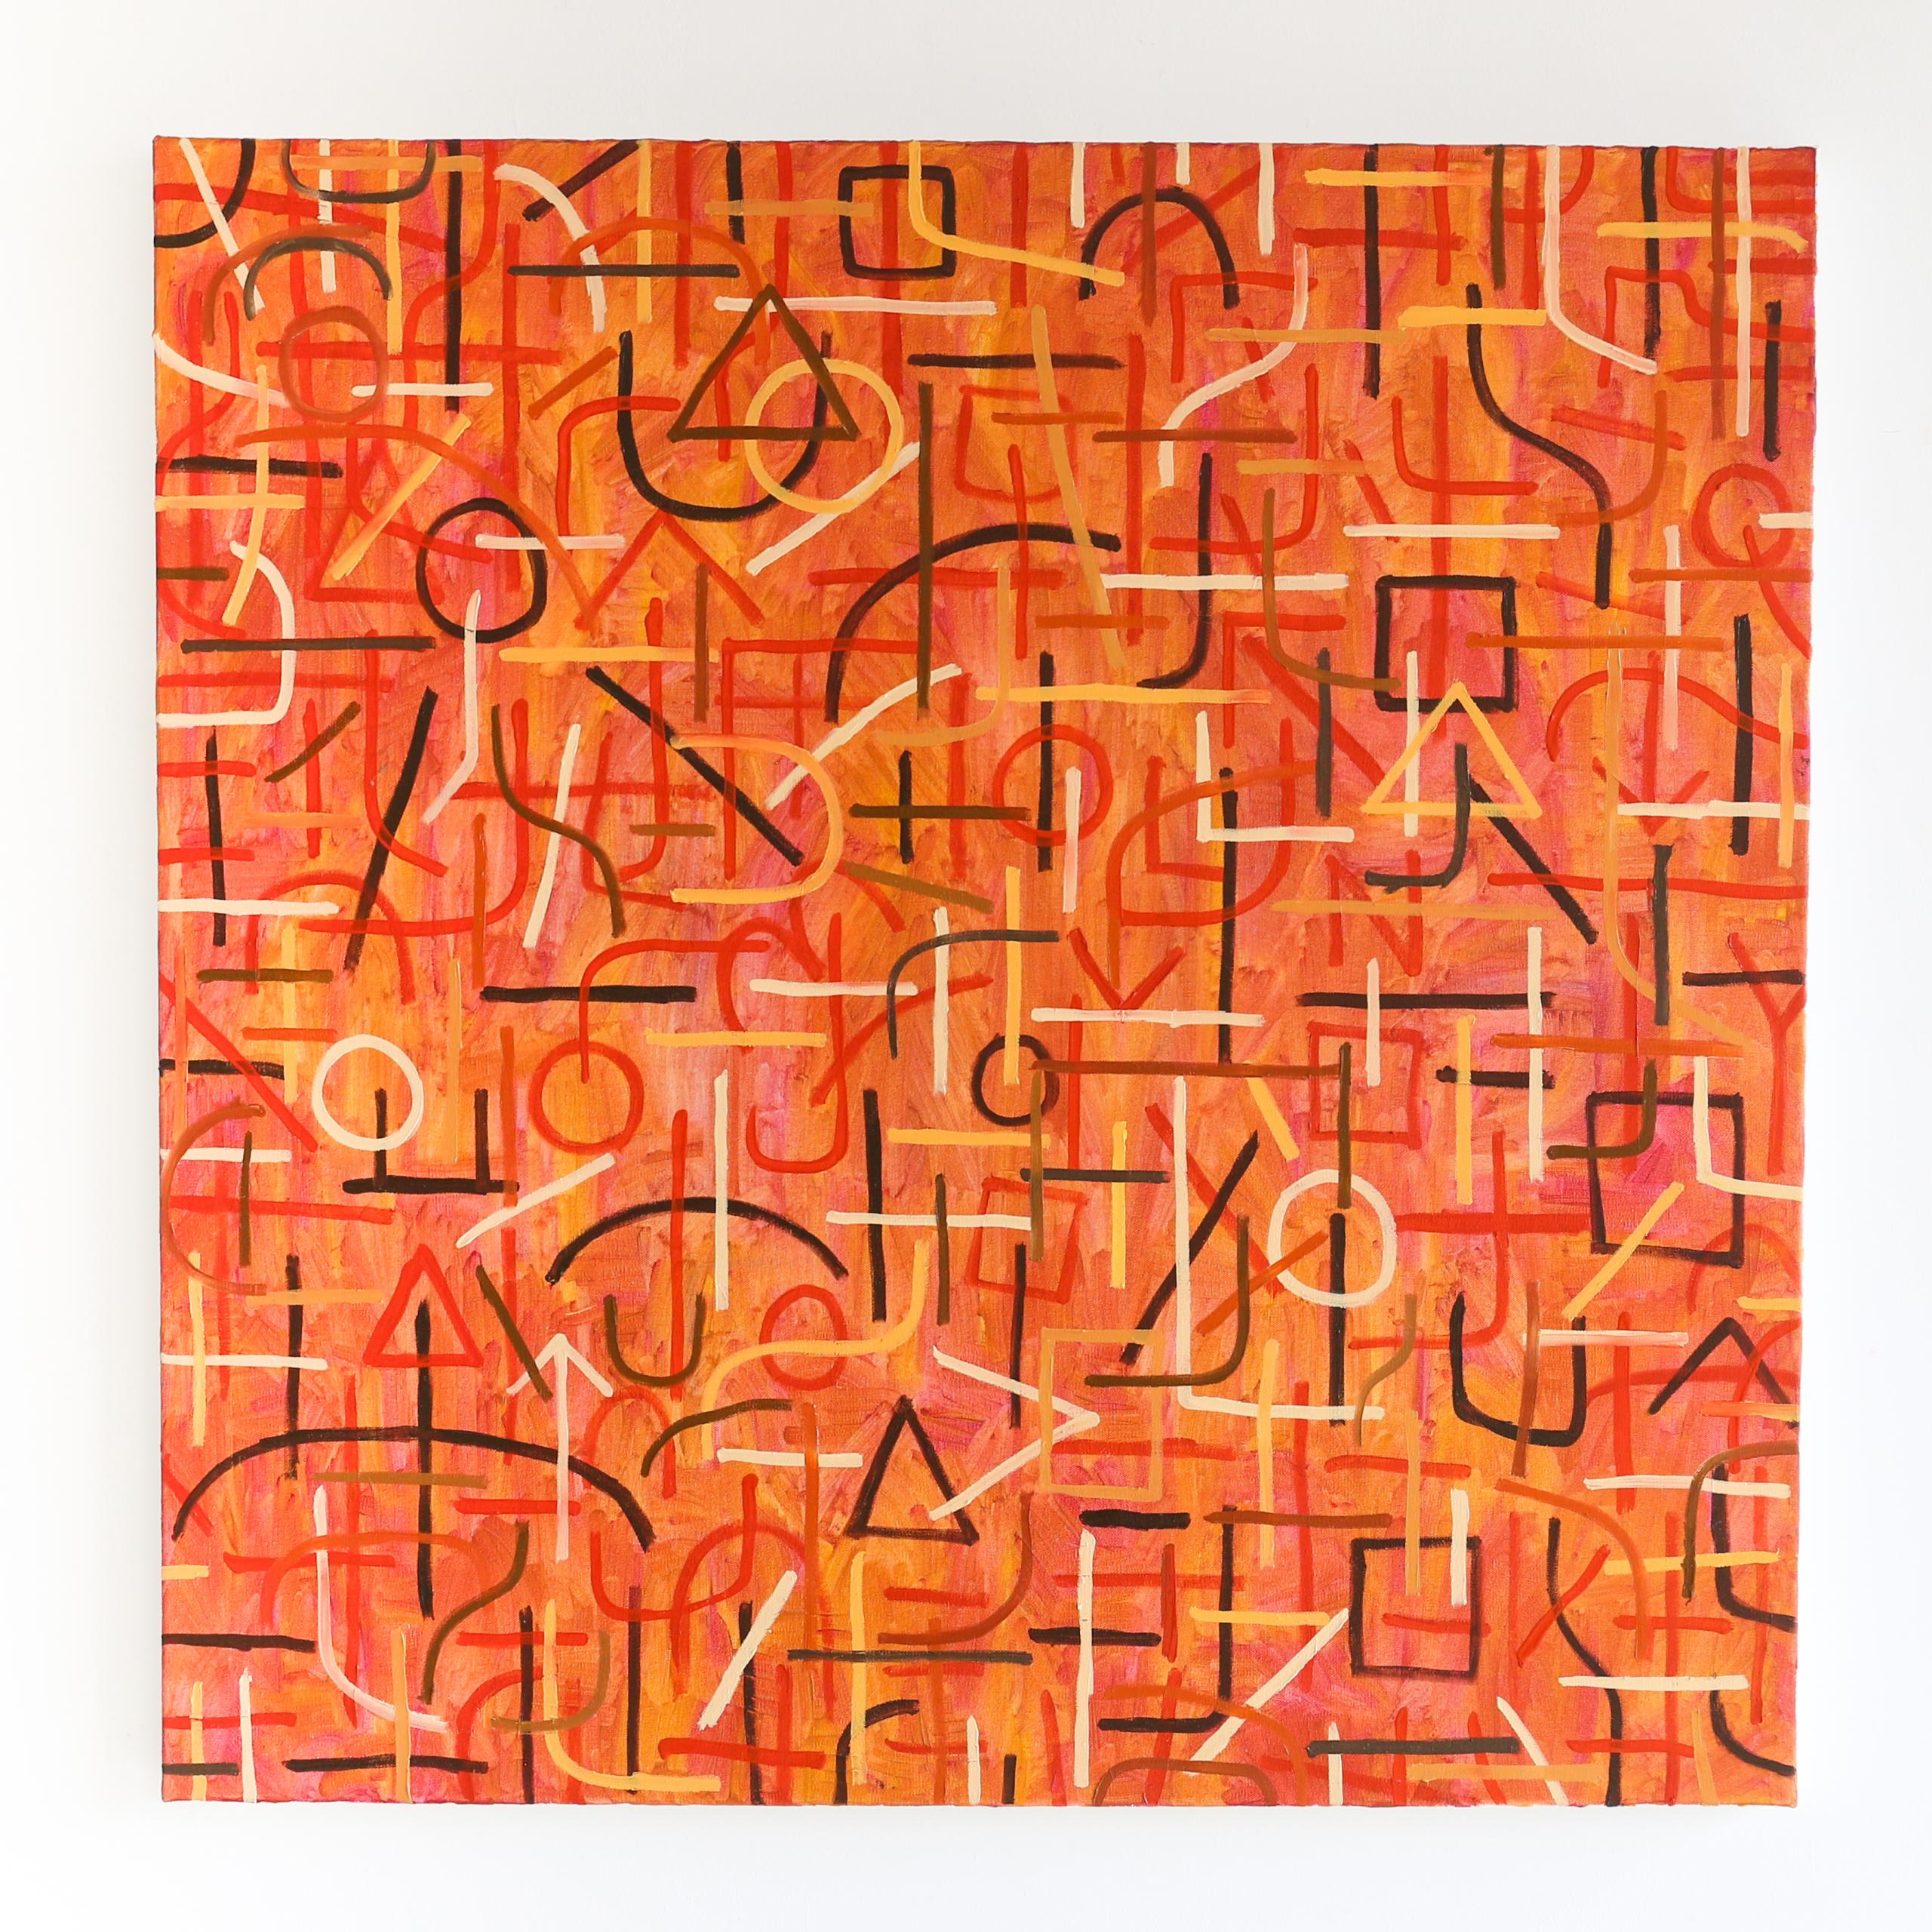 The images shows an abstract painting.The artwork is predominately orange with various shades and features a complex pattern of intersecting lines and geometric shapes in black, red and white. The lines and shapes include circles, triangles, curves and straight lines creating a dense, intricate design.